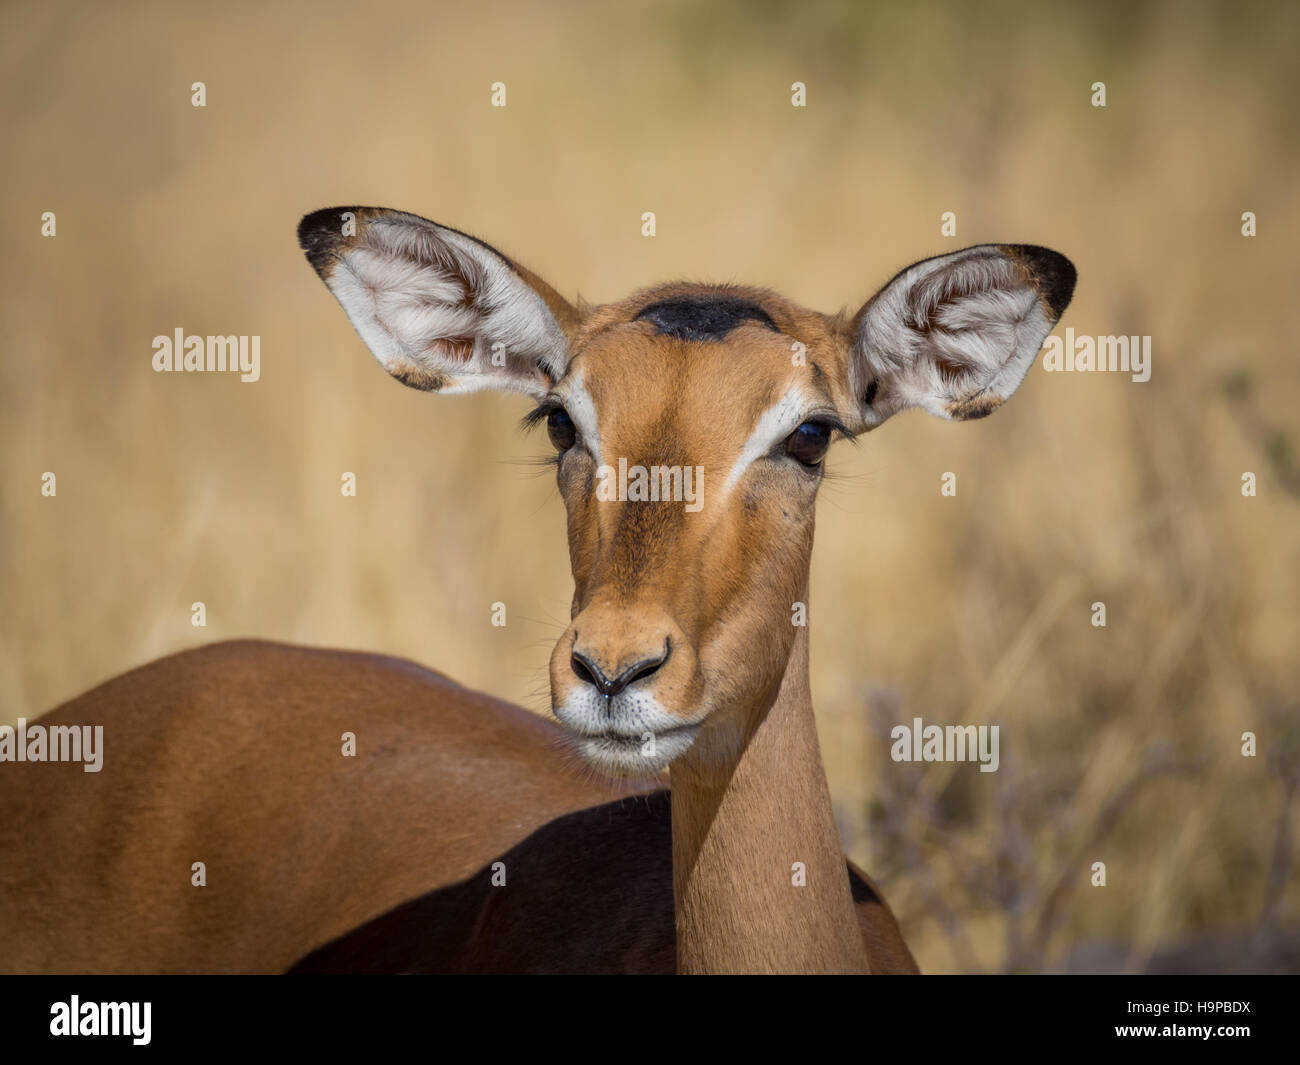 Closeup portrait of beautiful curious impala antelope with big ears and eyes in Moremi National Park, Botswana, Africa Stock Photo